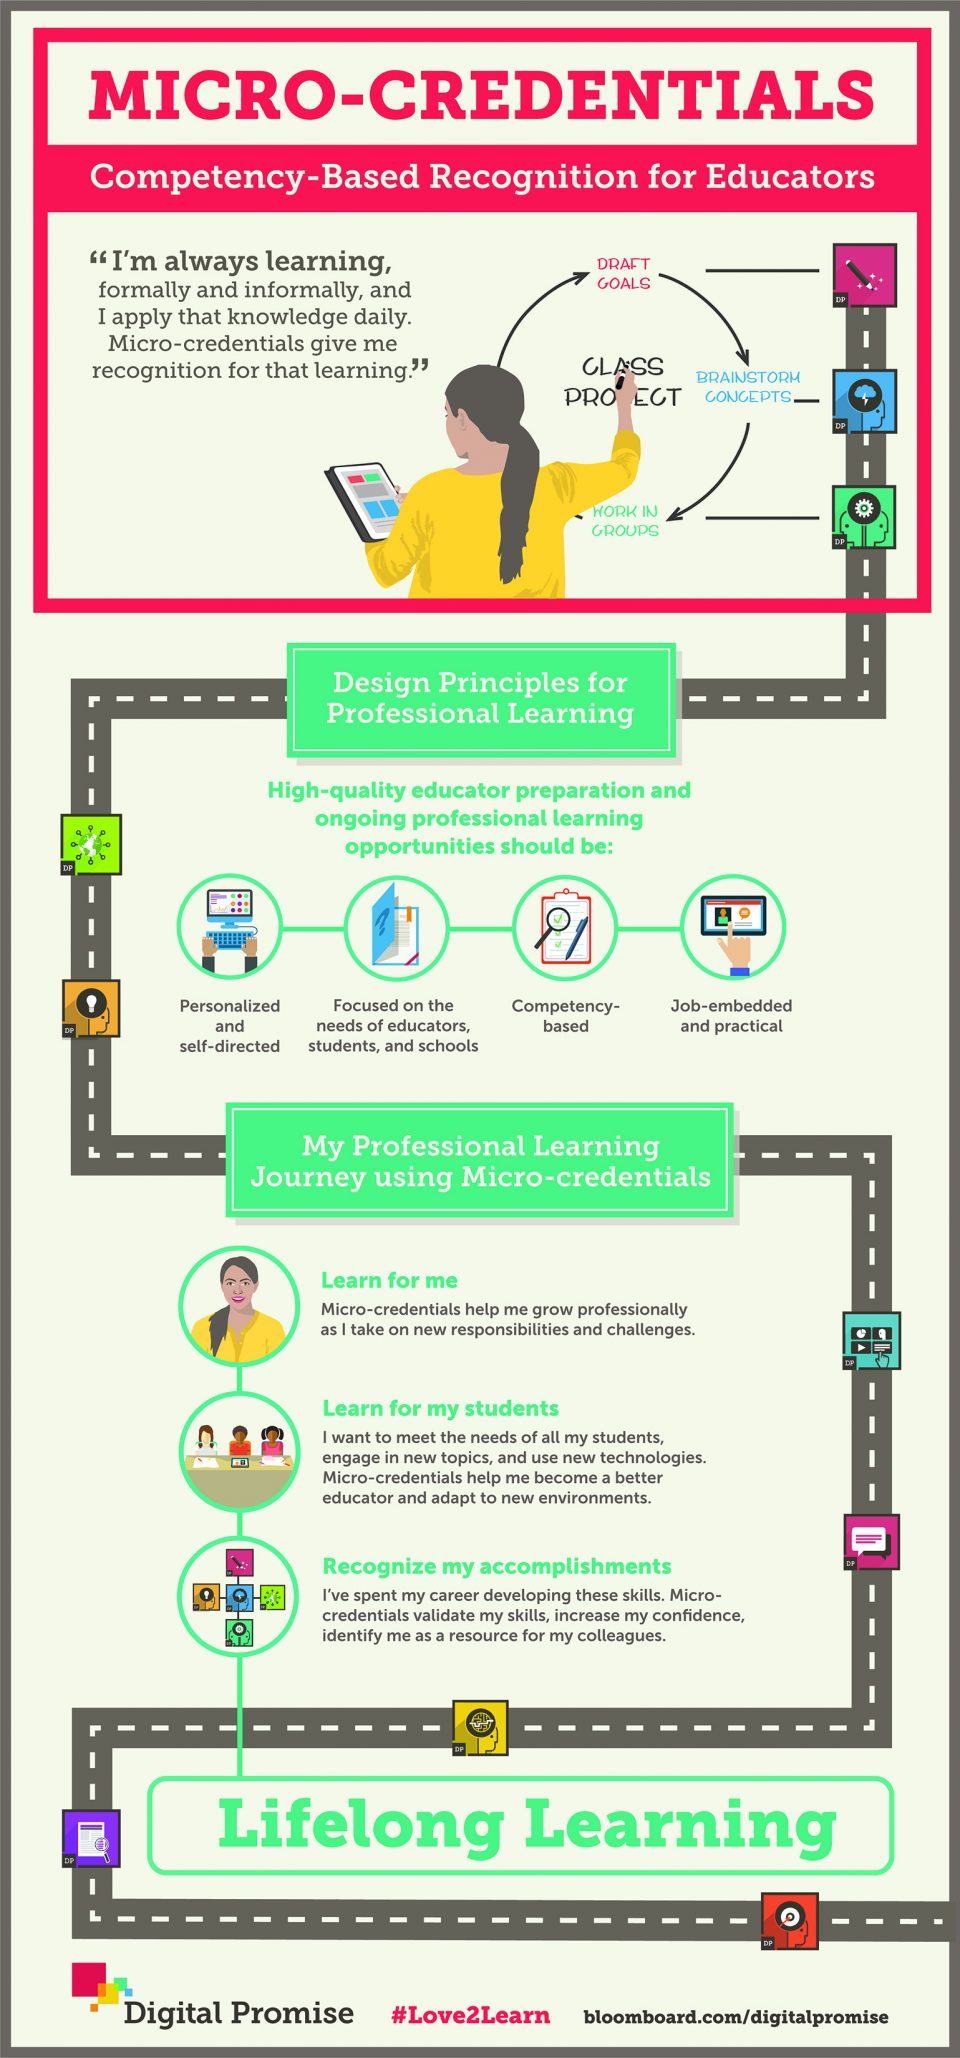 Micro-credentials: Competence-Based Recognition for Educators Infographic